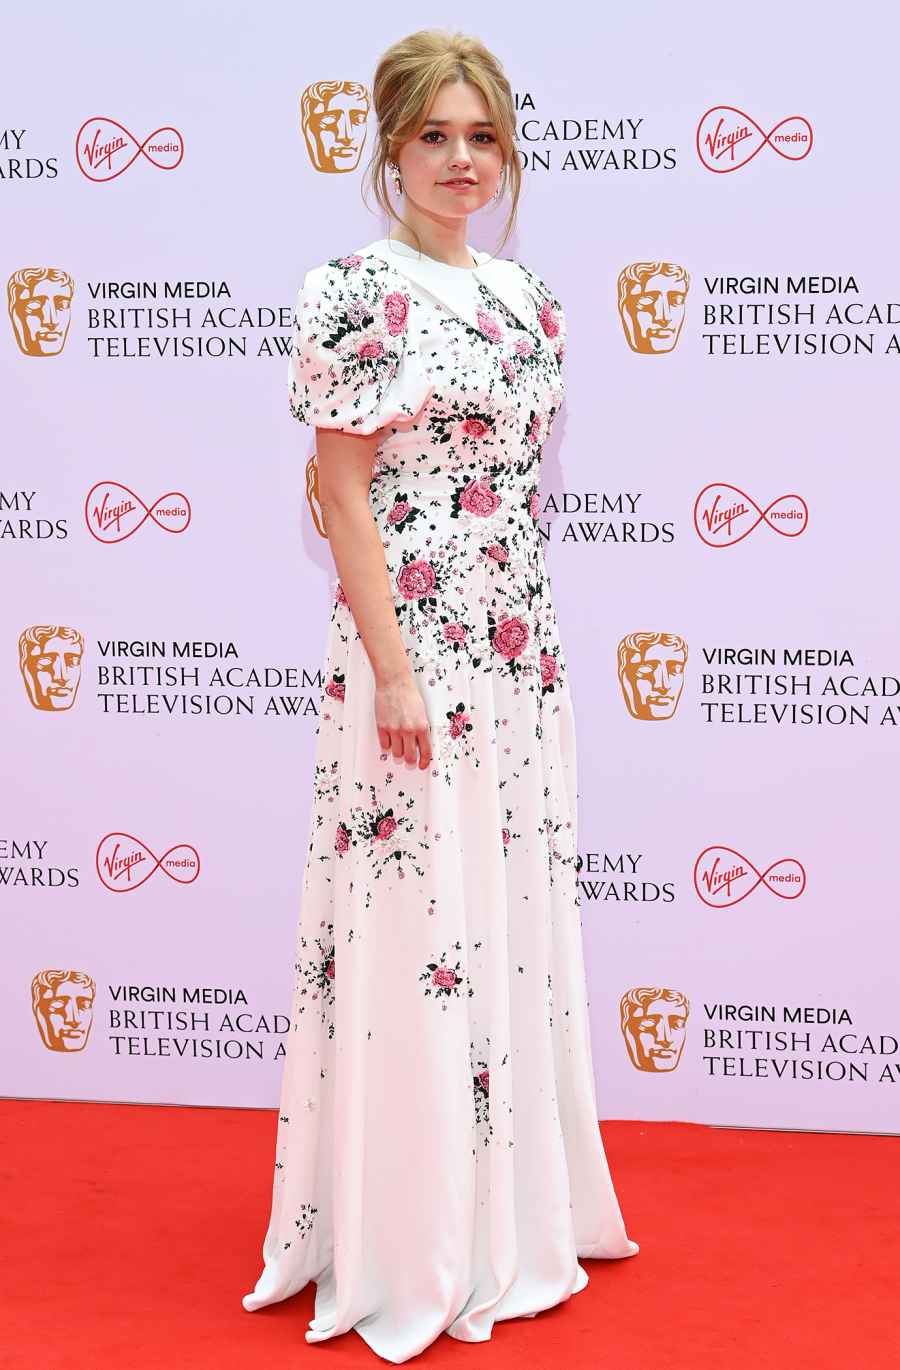 See What the Stars Wore on the 2021 BAFTA TV Awards Red Carpet